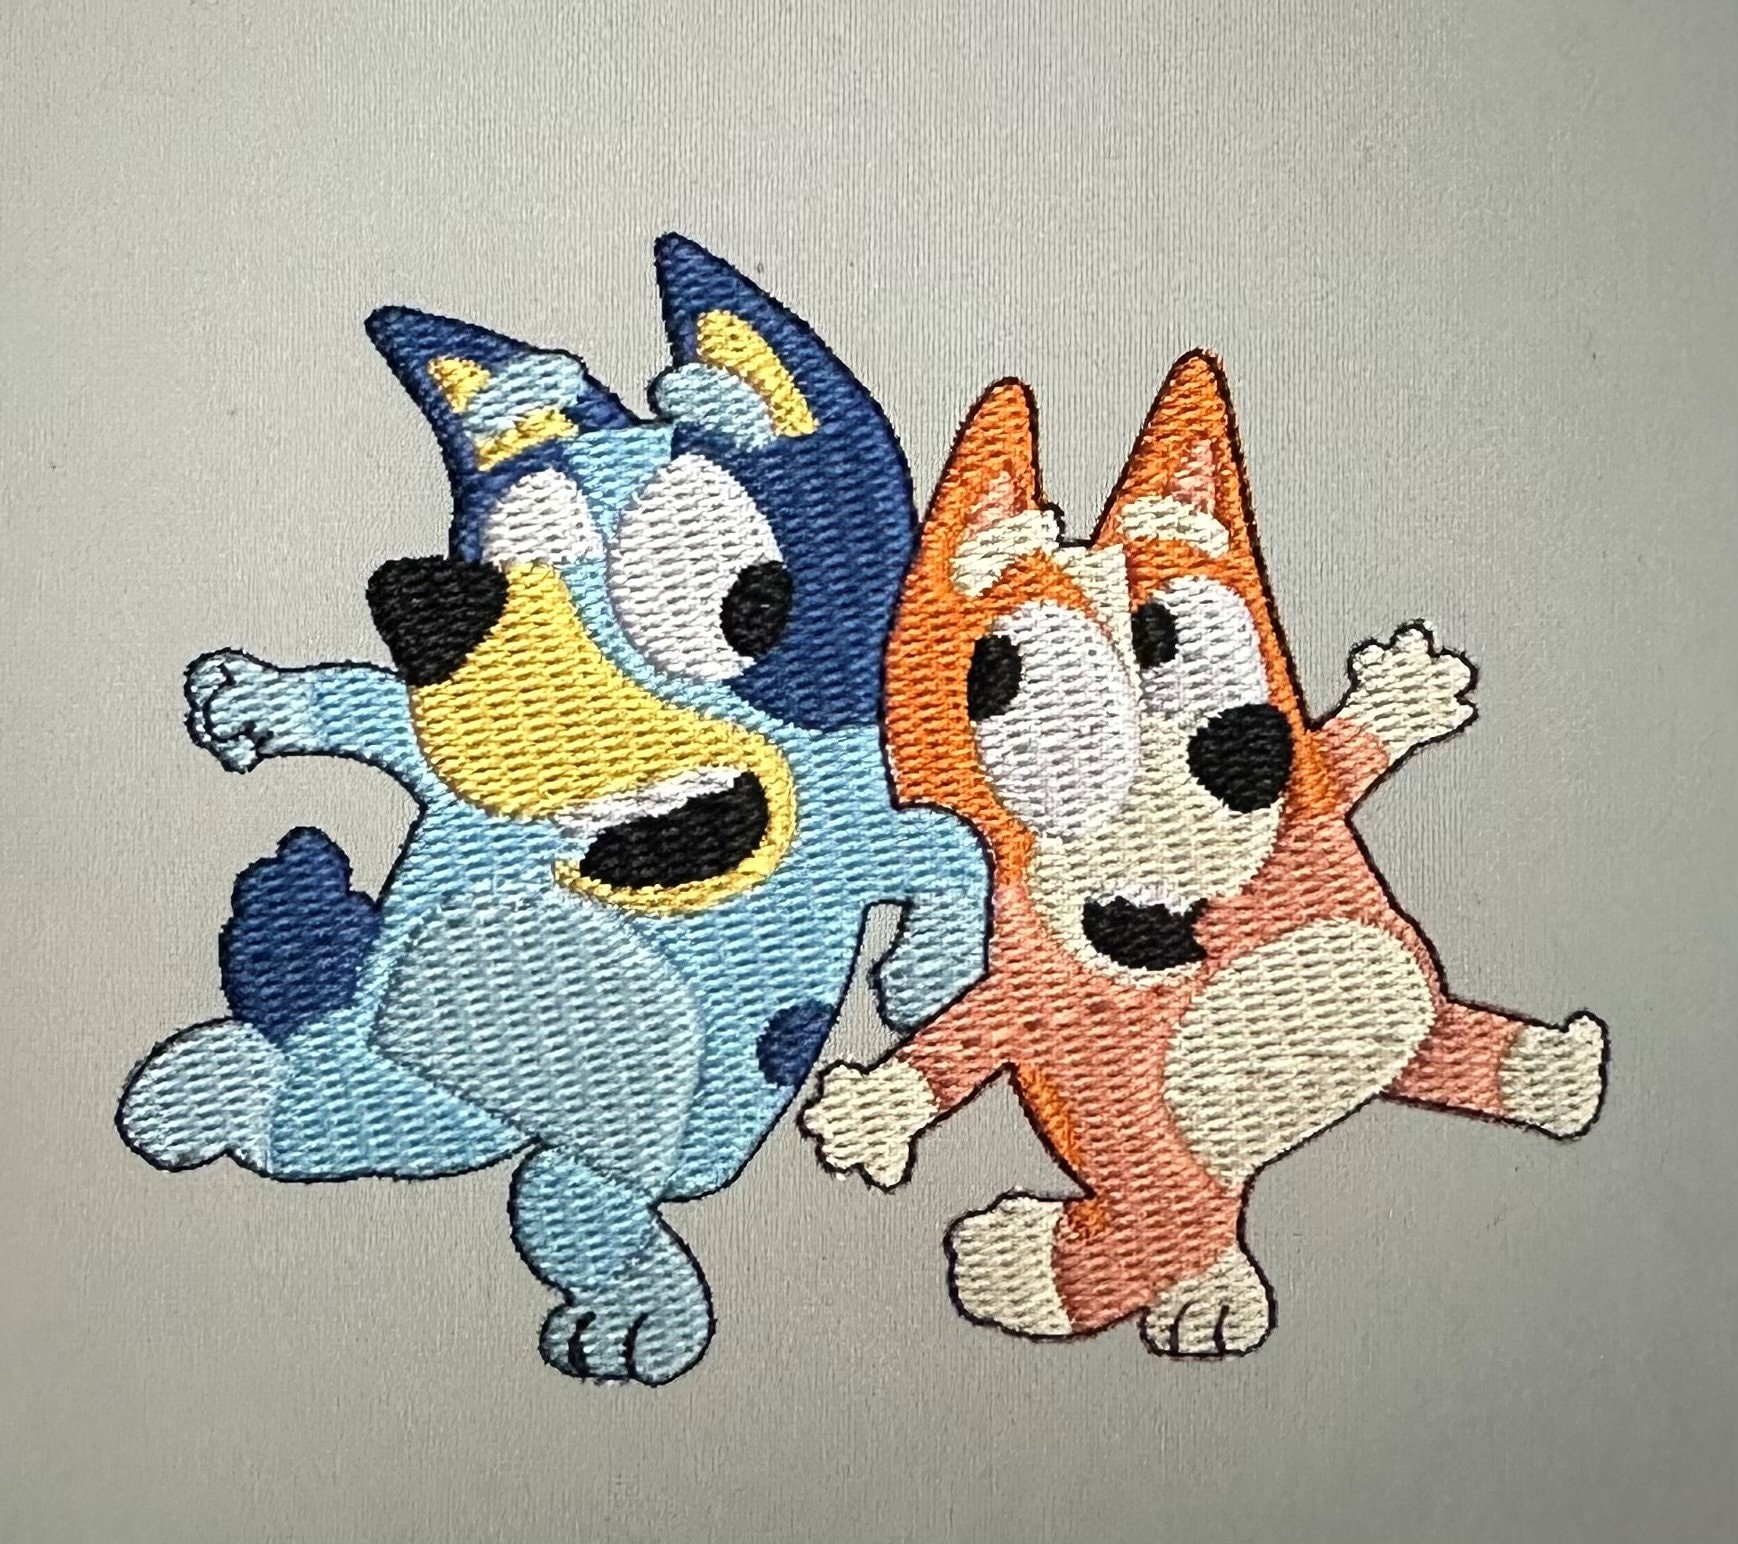 DIGITAL FILE ONLY Perler Bead Pattern for Bluey and Bingo 